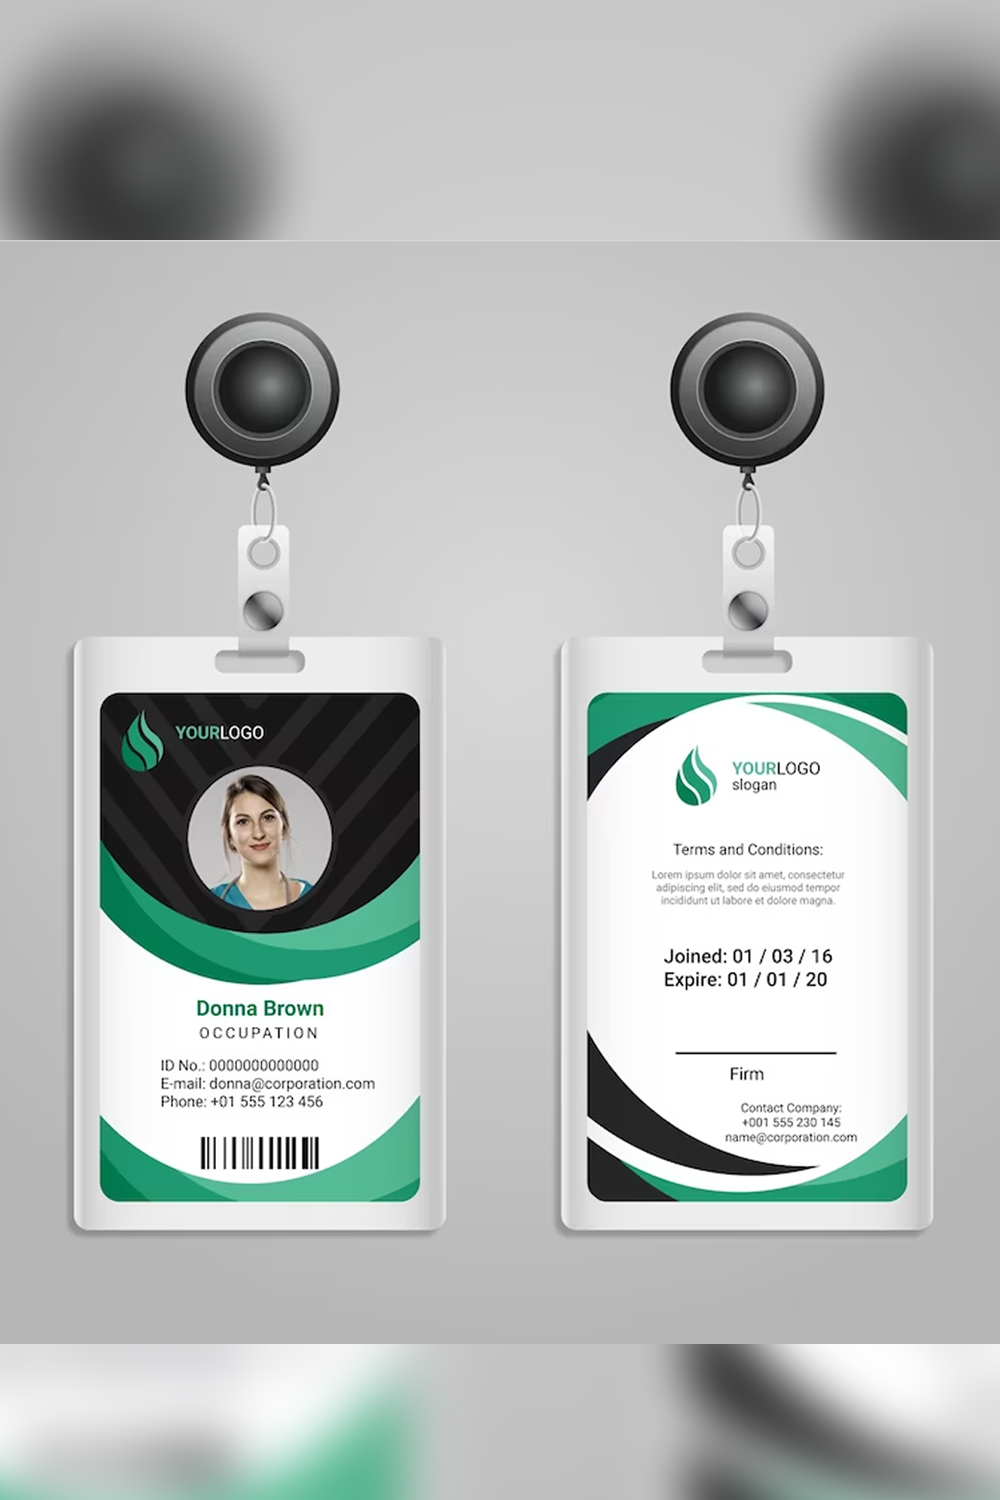 Archive abstract-design-id-cards-template pinterest preview image.